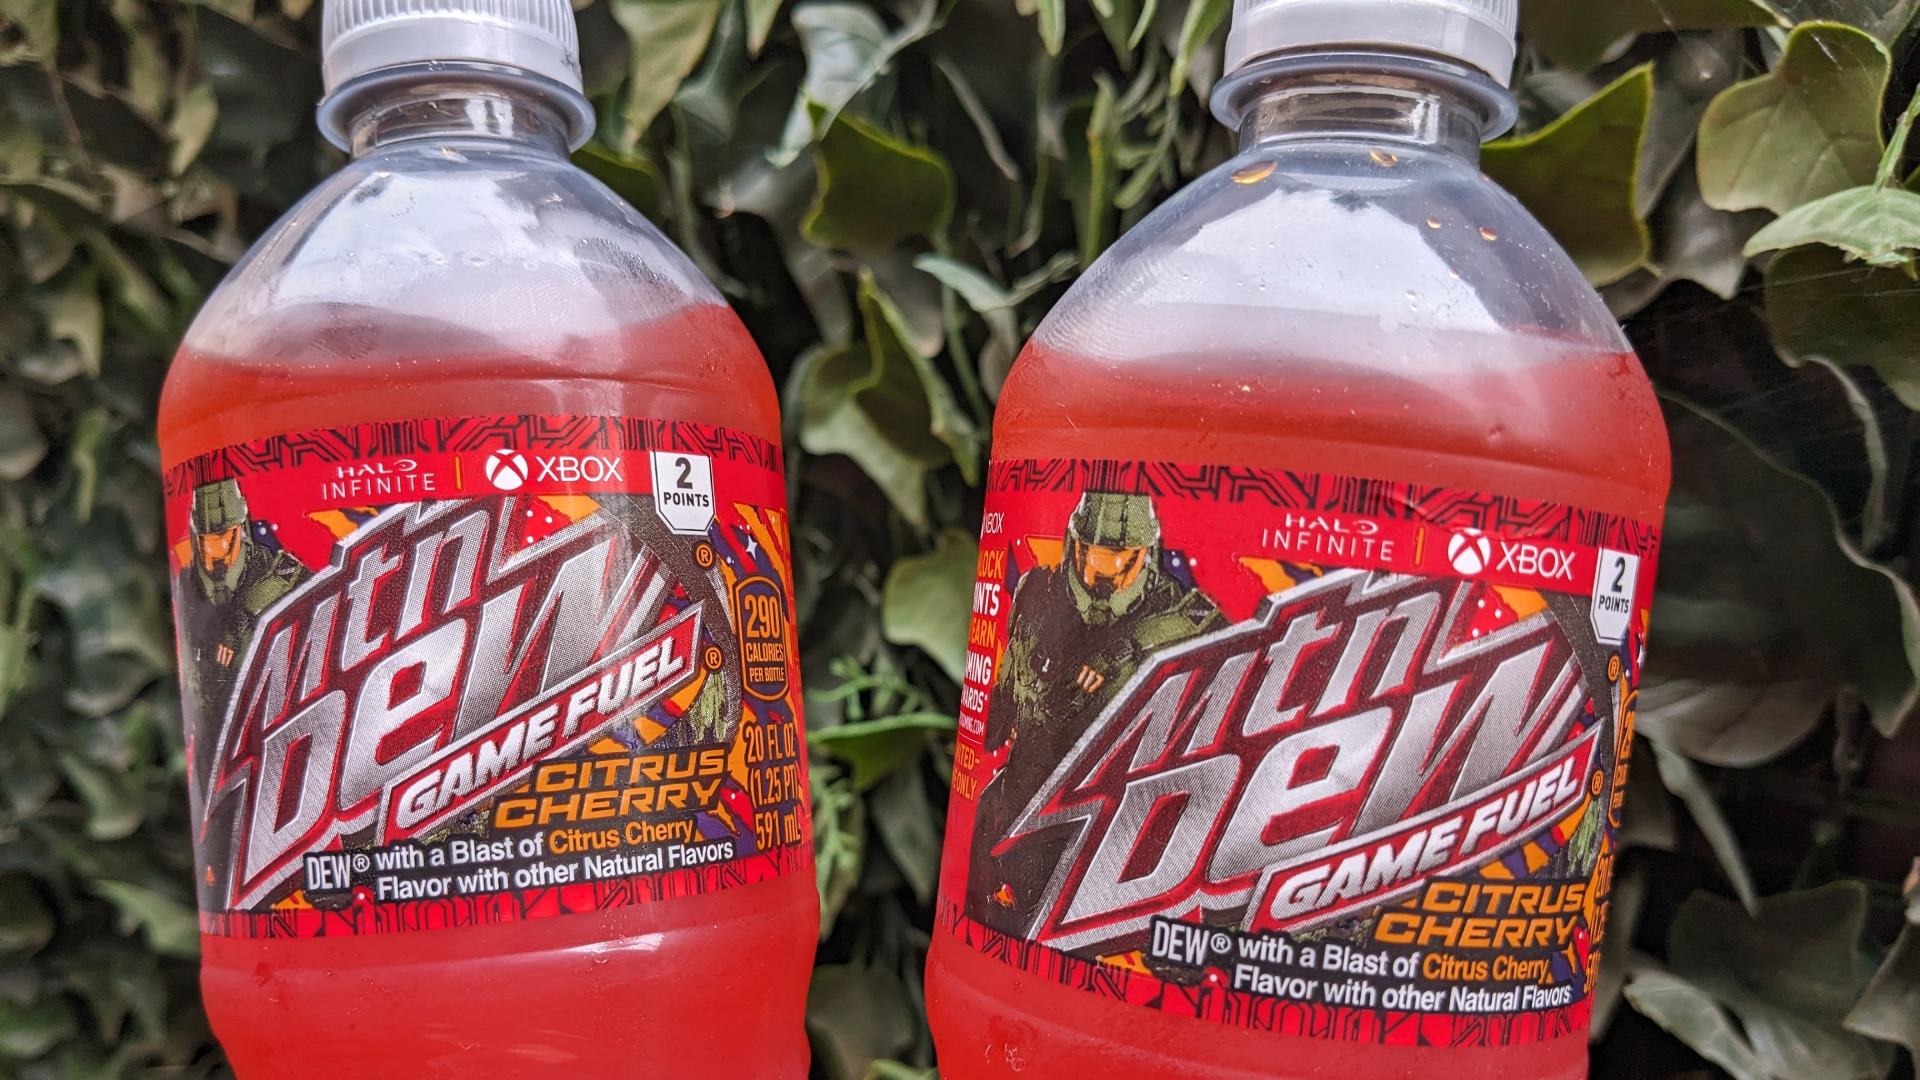  The surprise return of a legendary Mountain Dew flavor made me very happy this year 